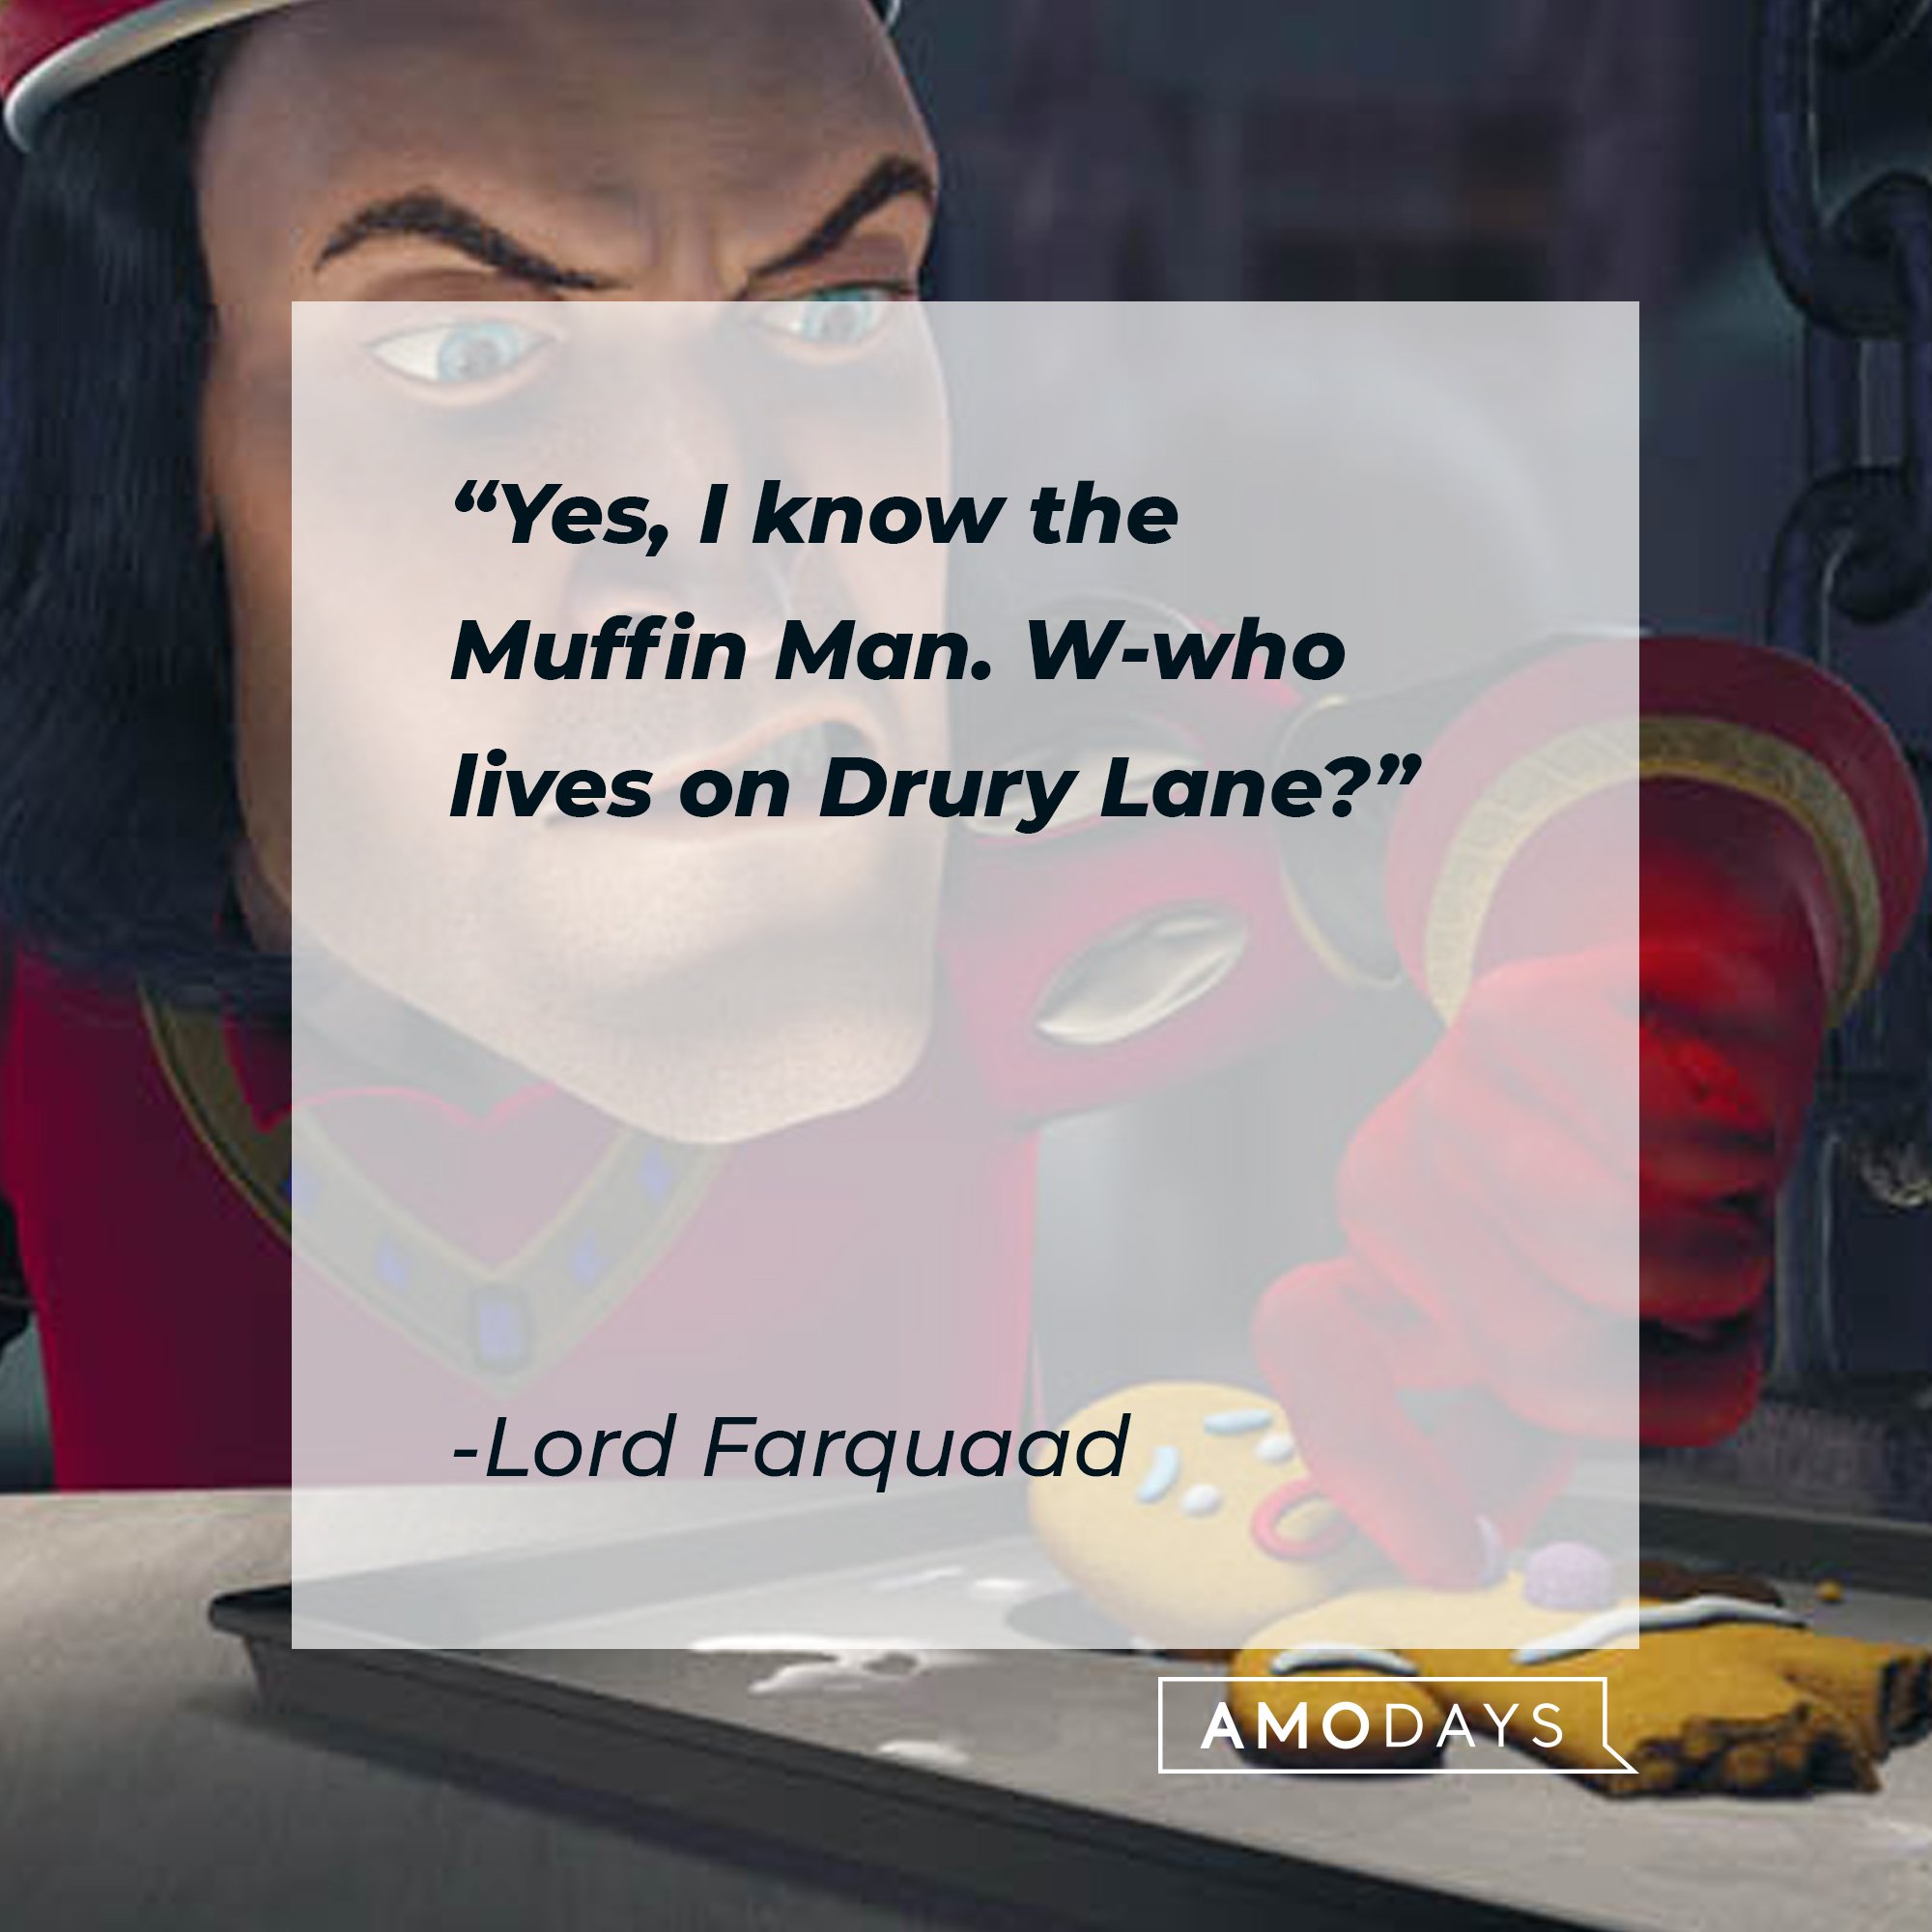 Lord Farquaad's quote: "Yes, I know the Muffin Man. W-who lives on Drury Lane?" | Image: AmoDays 